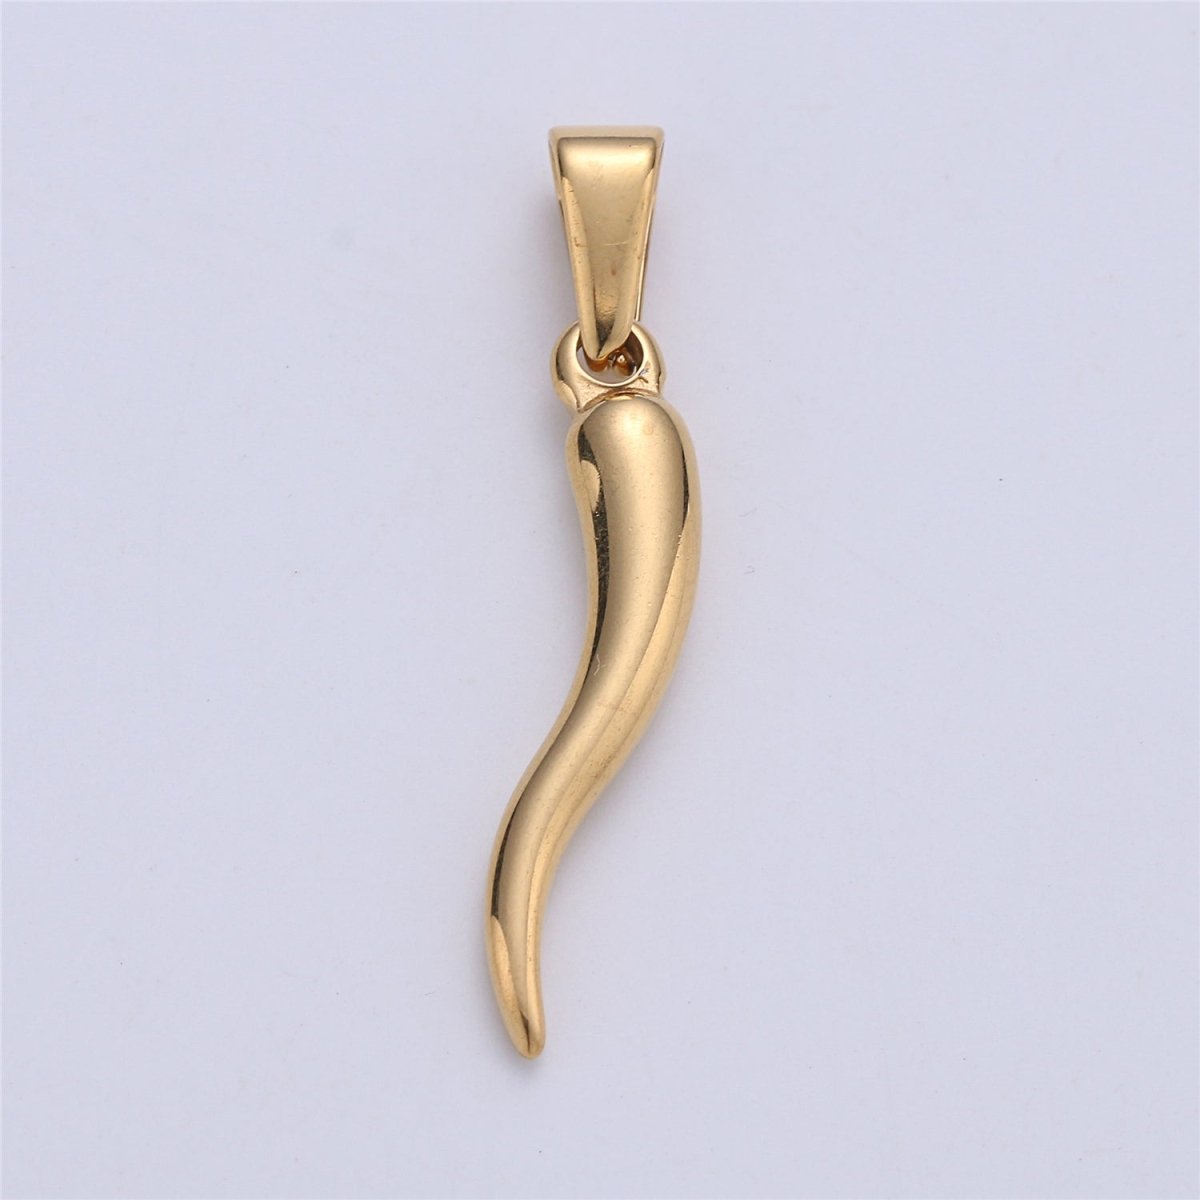 Gold Filled, Silver Stainless Steel 35mm Italian Horn Charm Pendant, Good Luck Amulet, Pendant For Jewelry Necklace Making Component Supply J-661 - DLUXCA